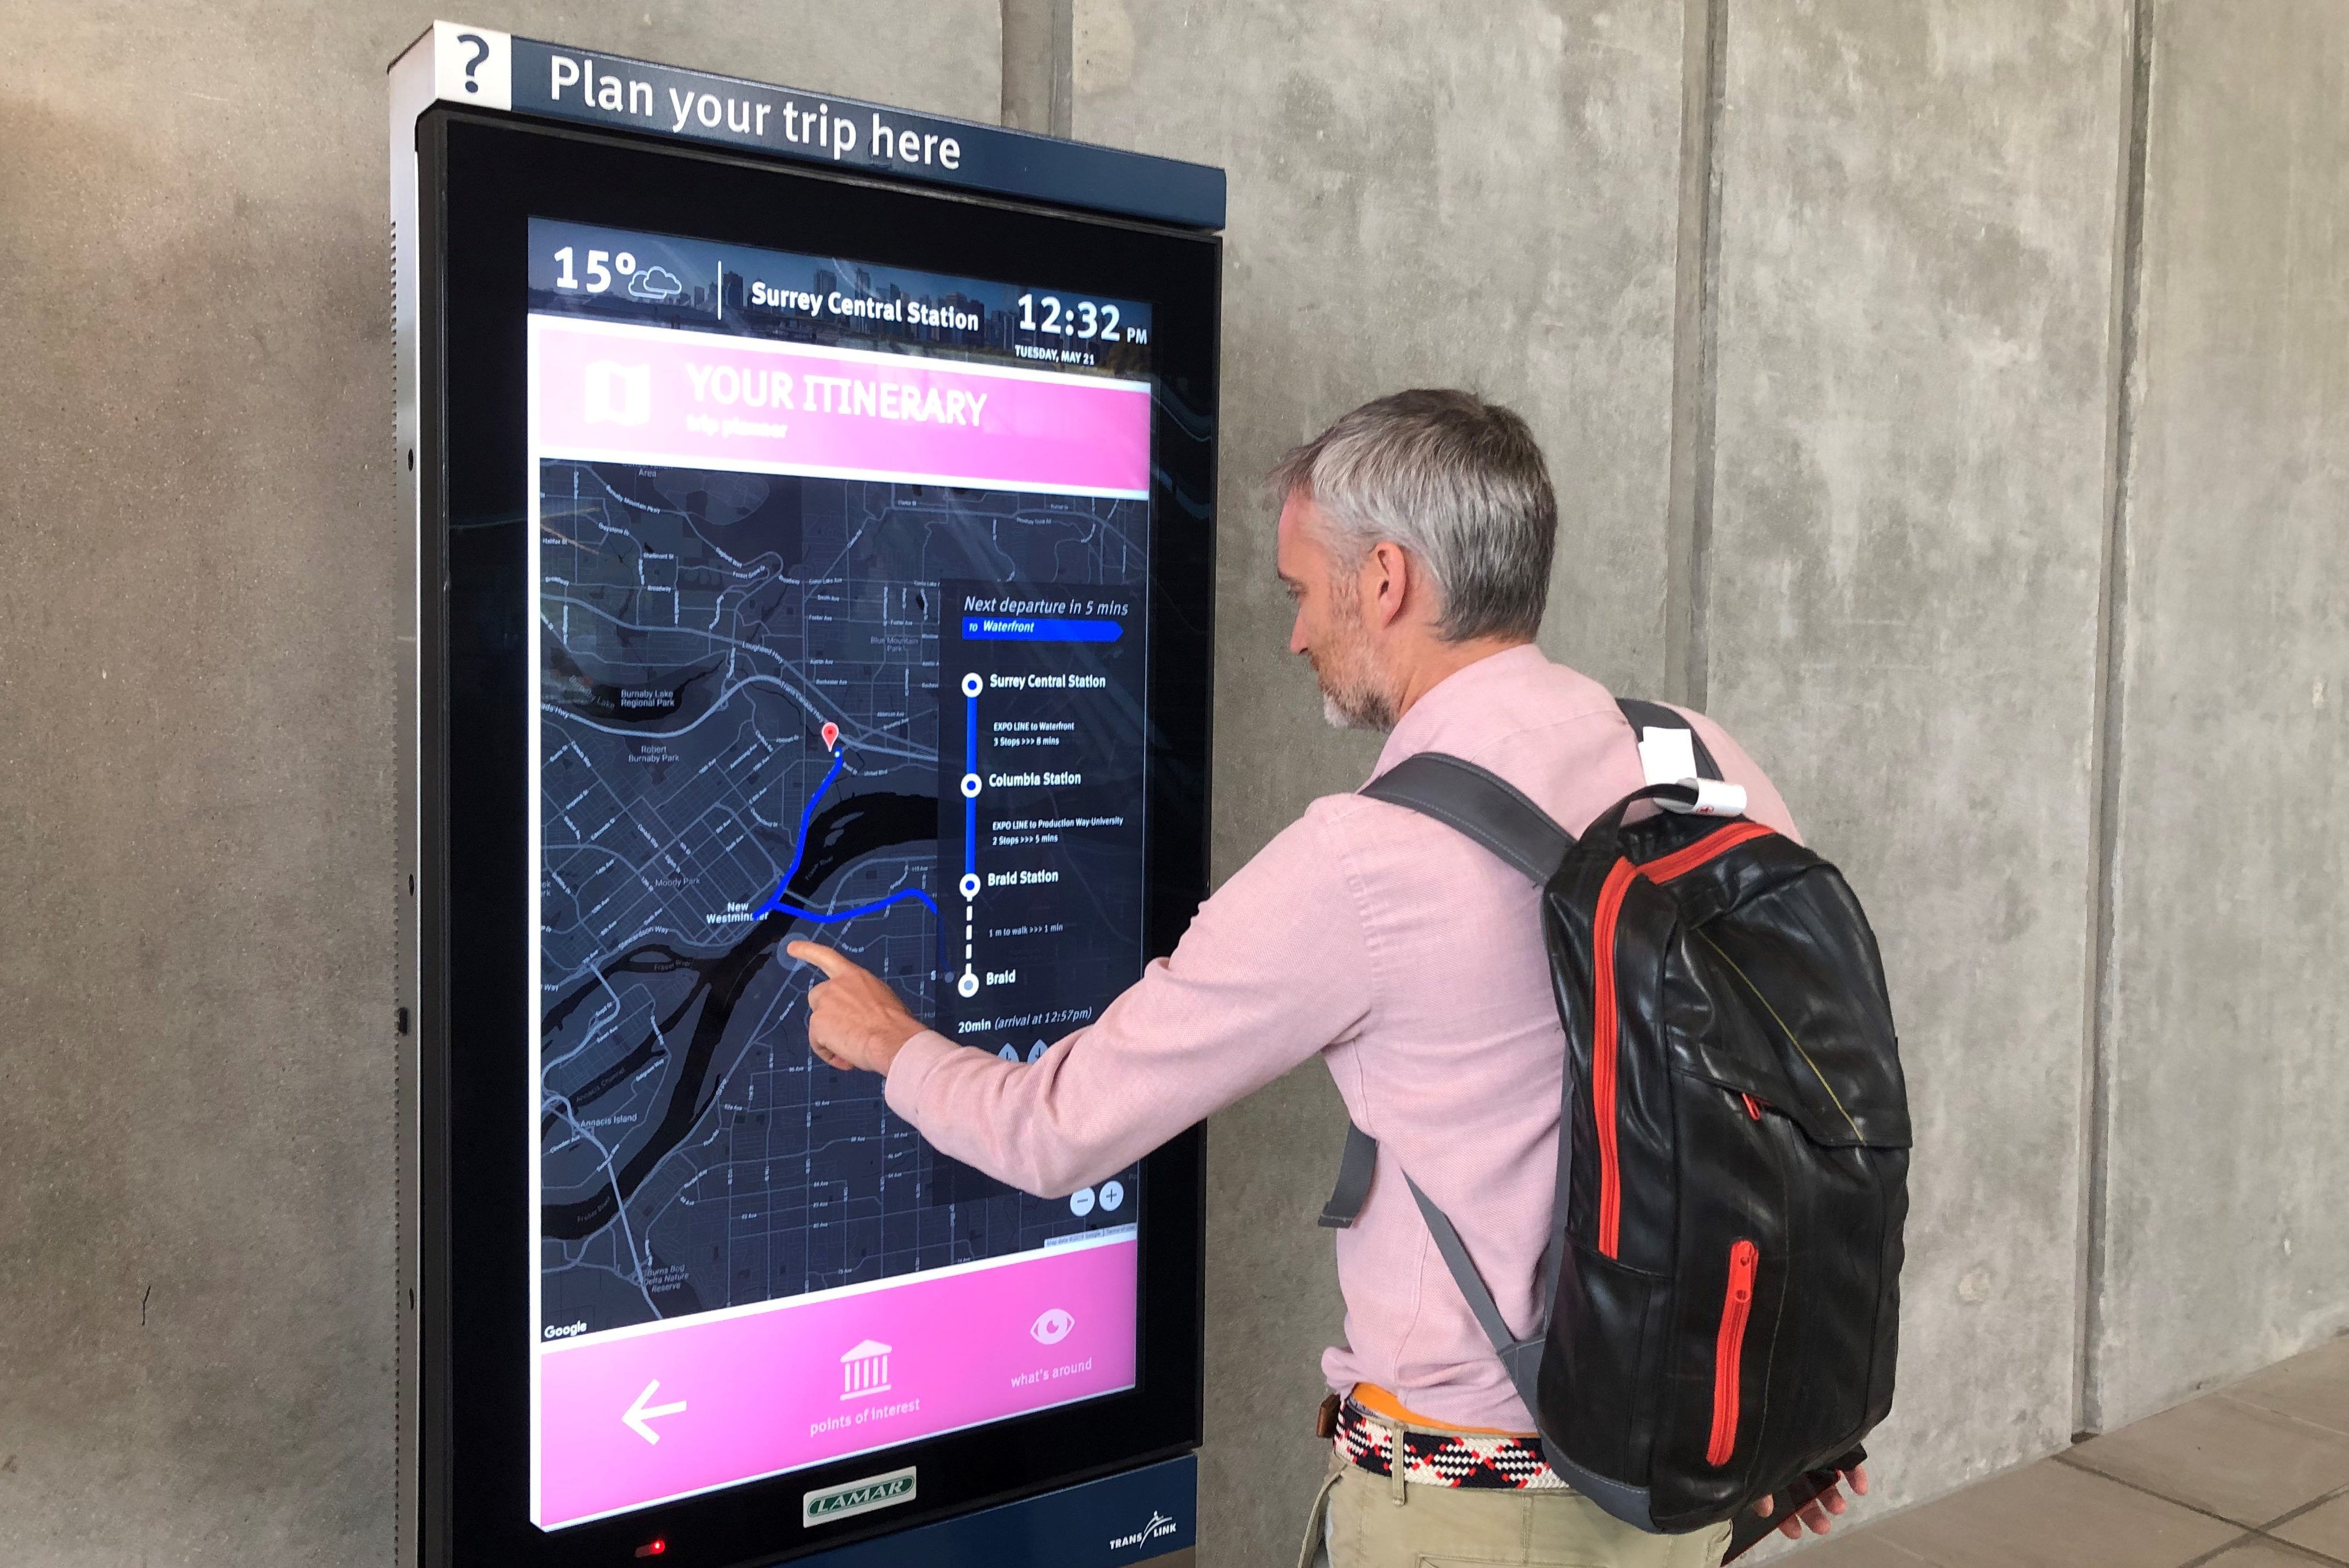 New TransLink touch-screens aim to help commuters with trip planning - NEWS  1130